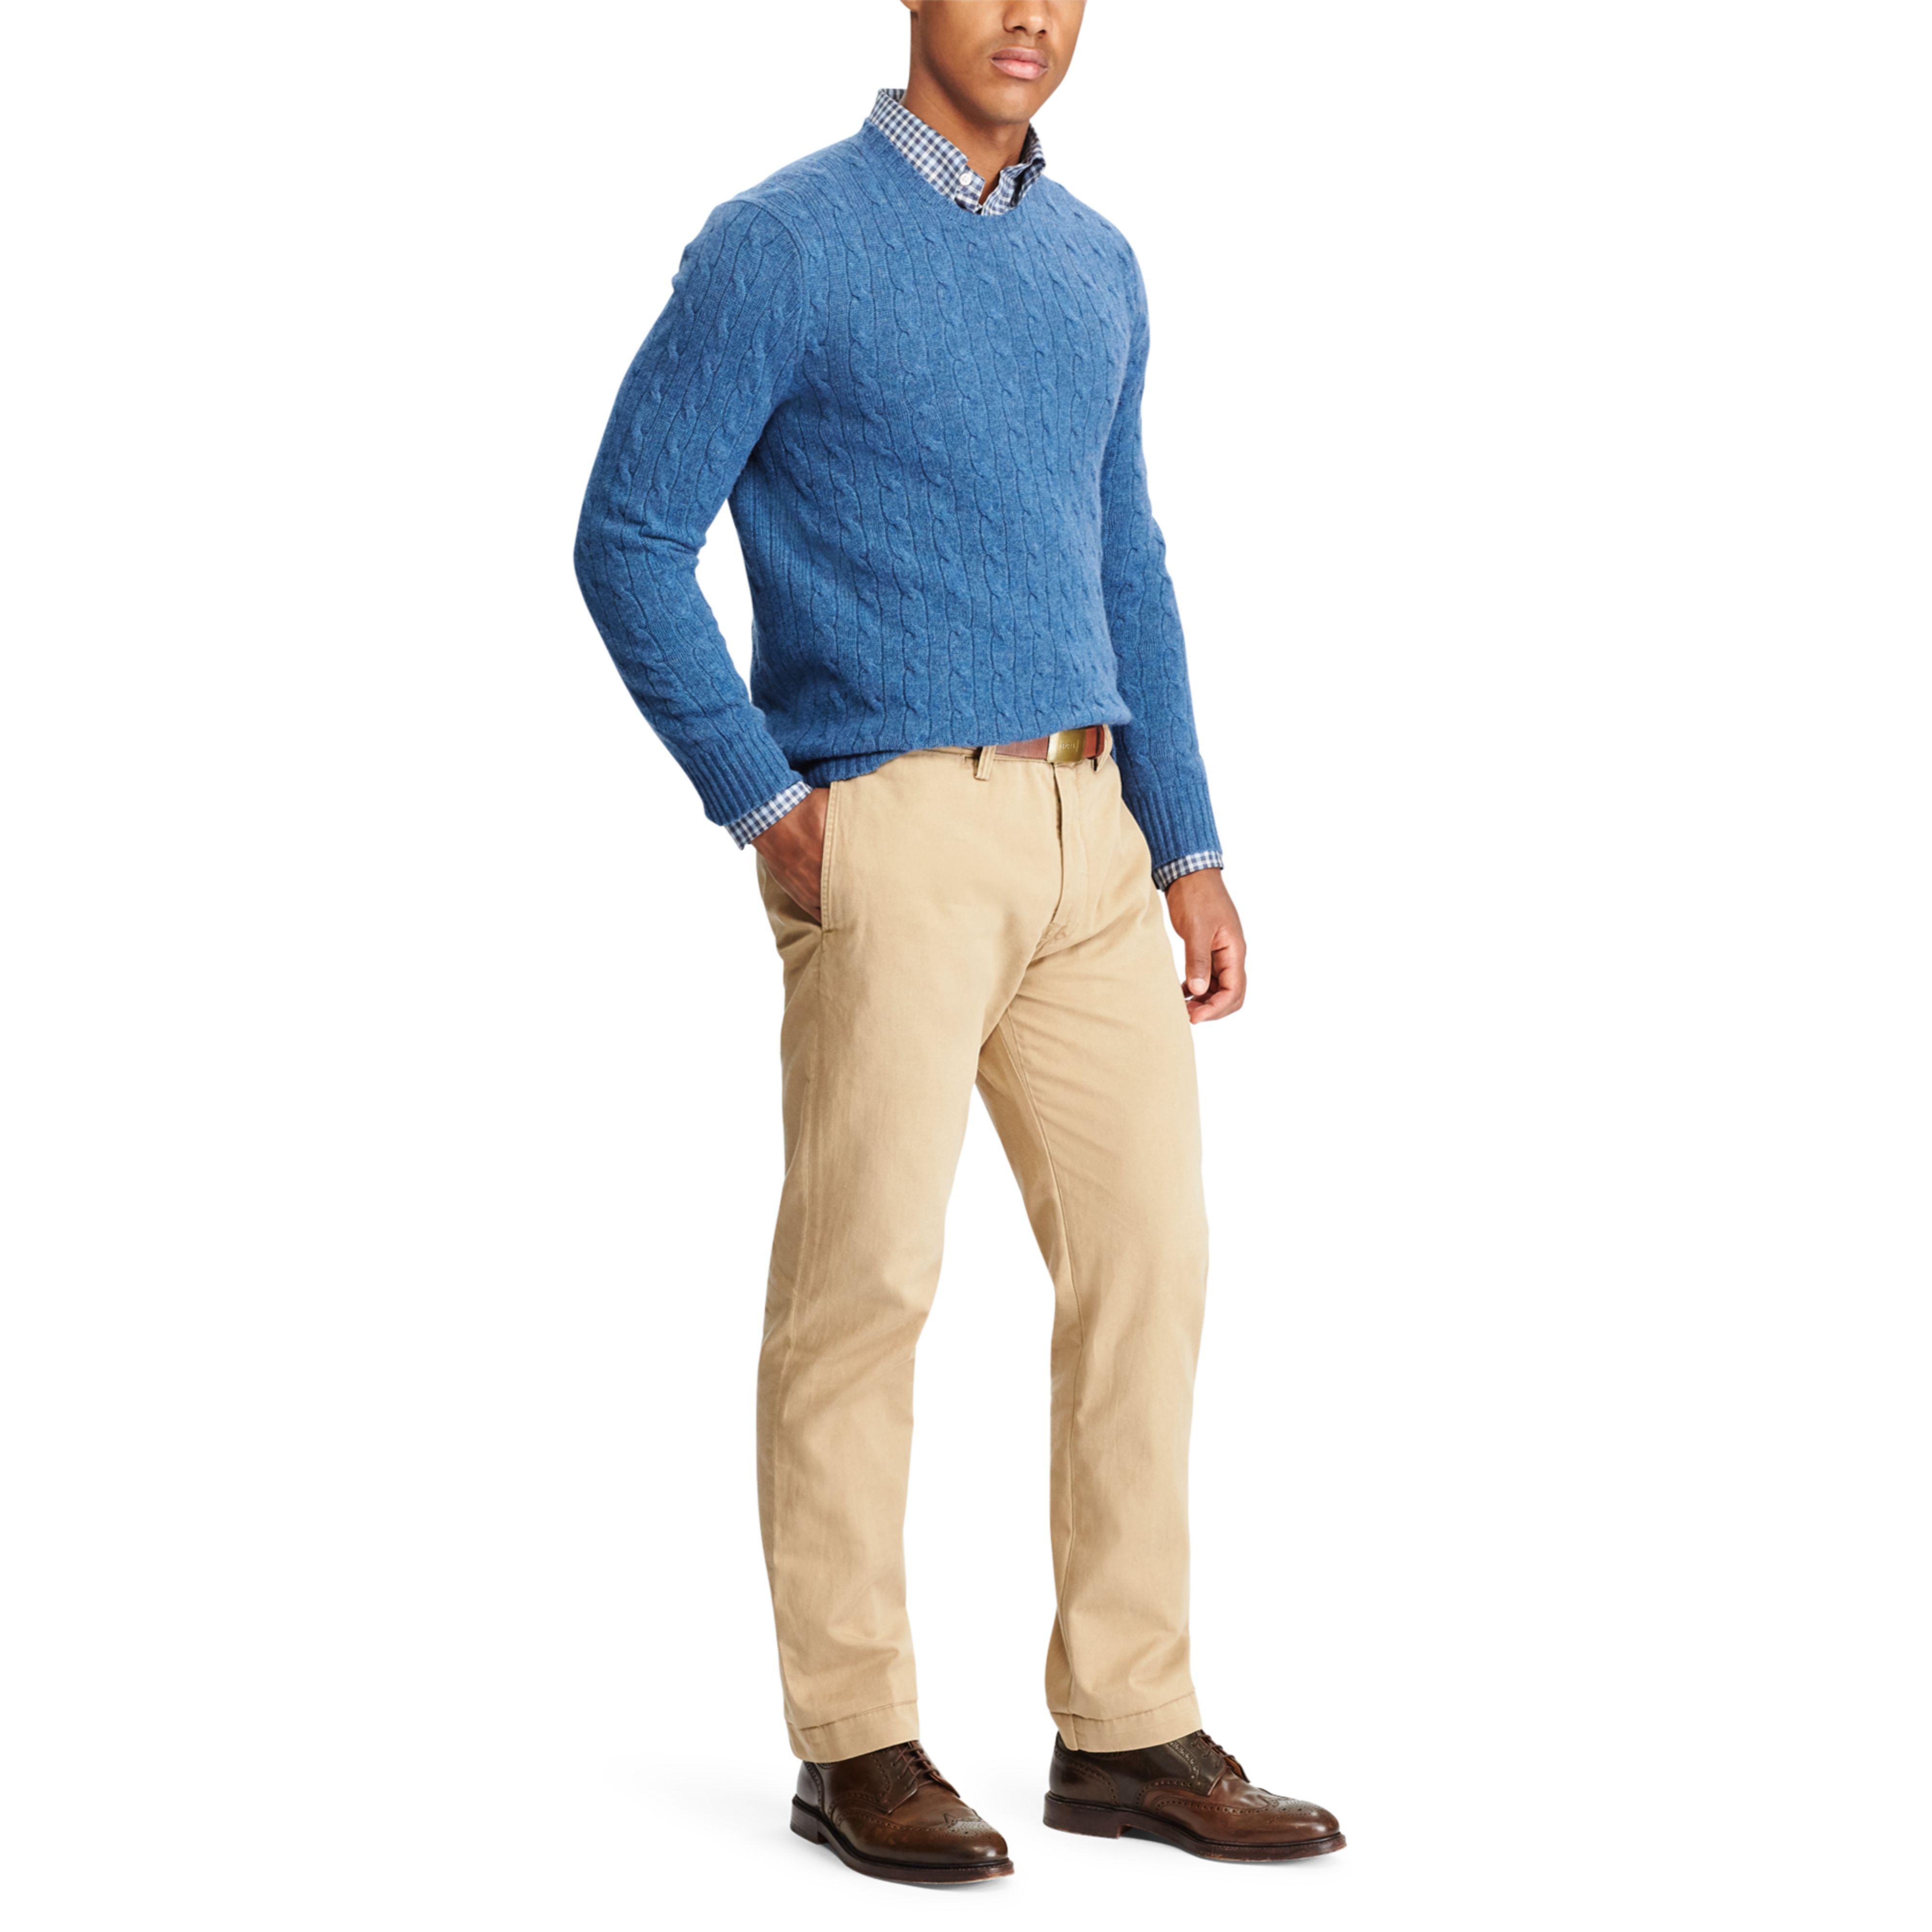 Lyst - Polo Ralph Lauren Classic Fit Cotton Chino for Men